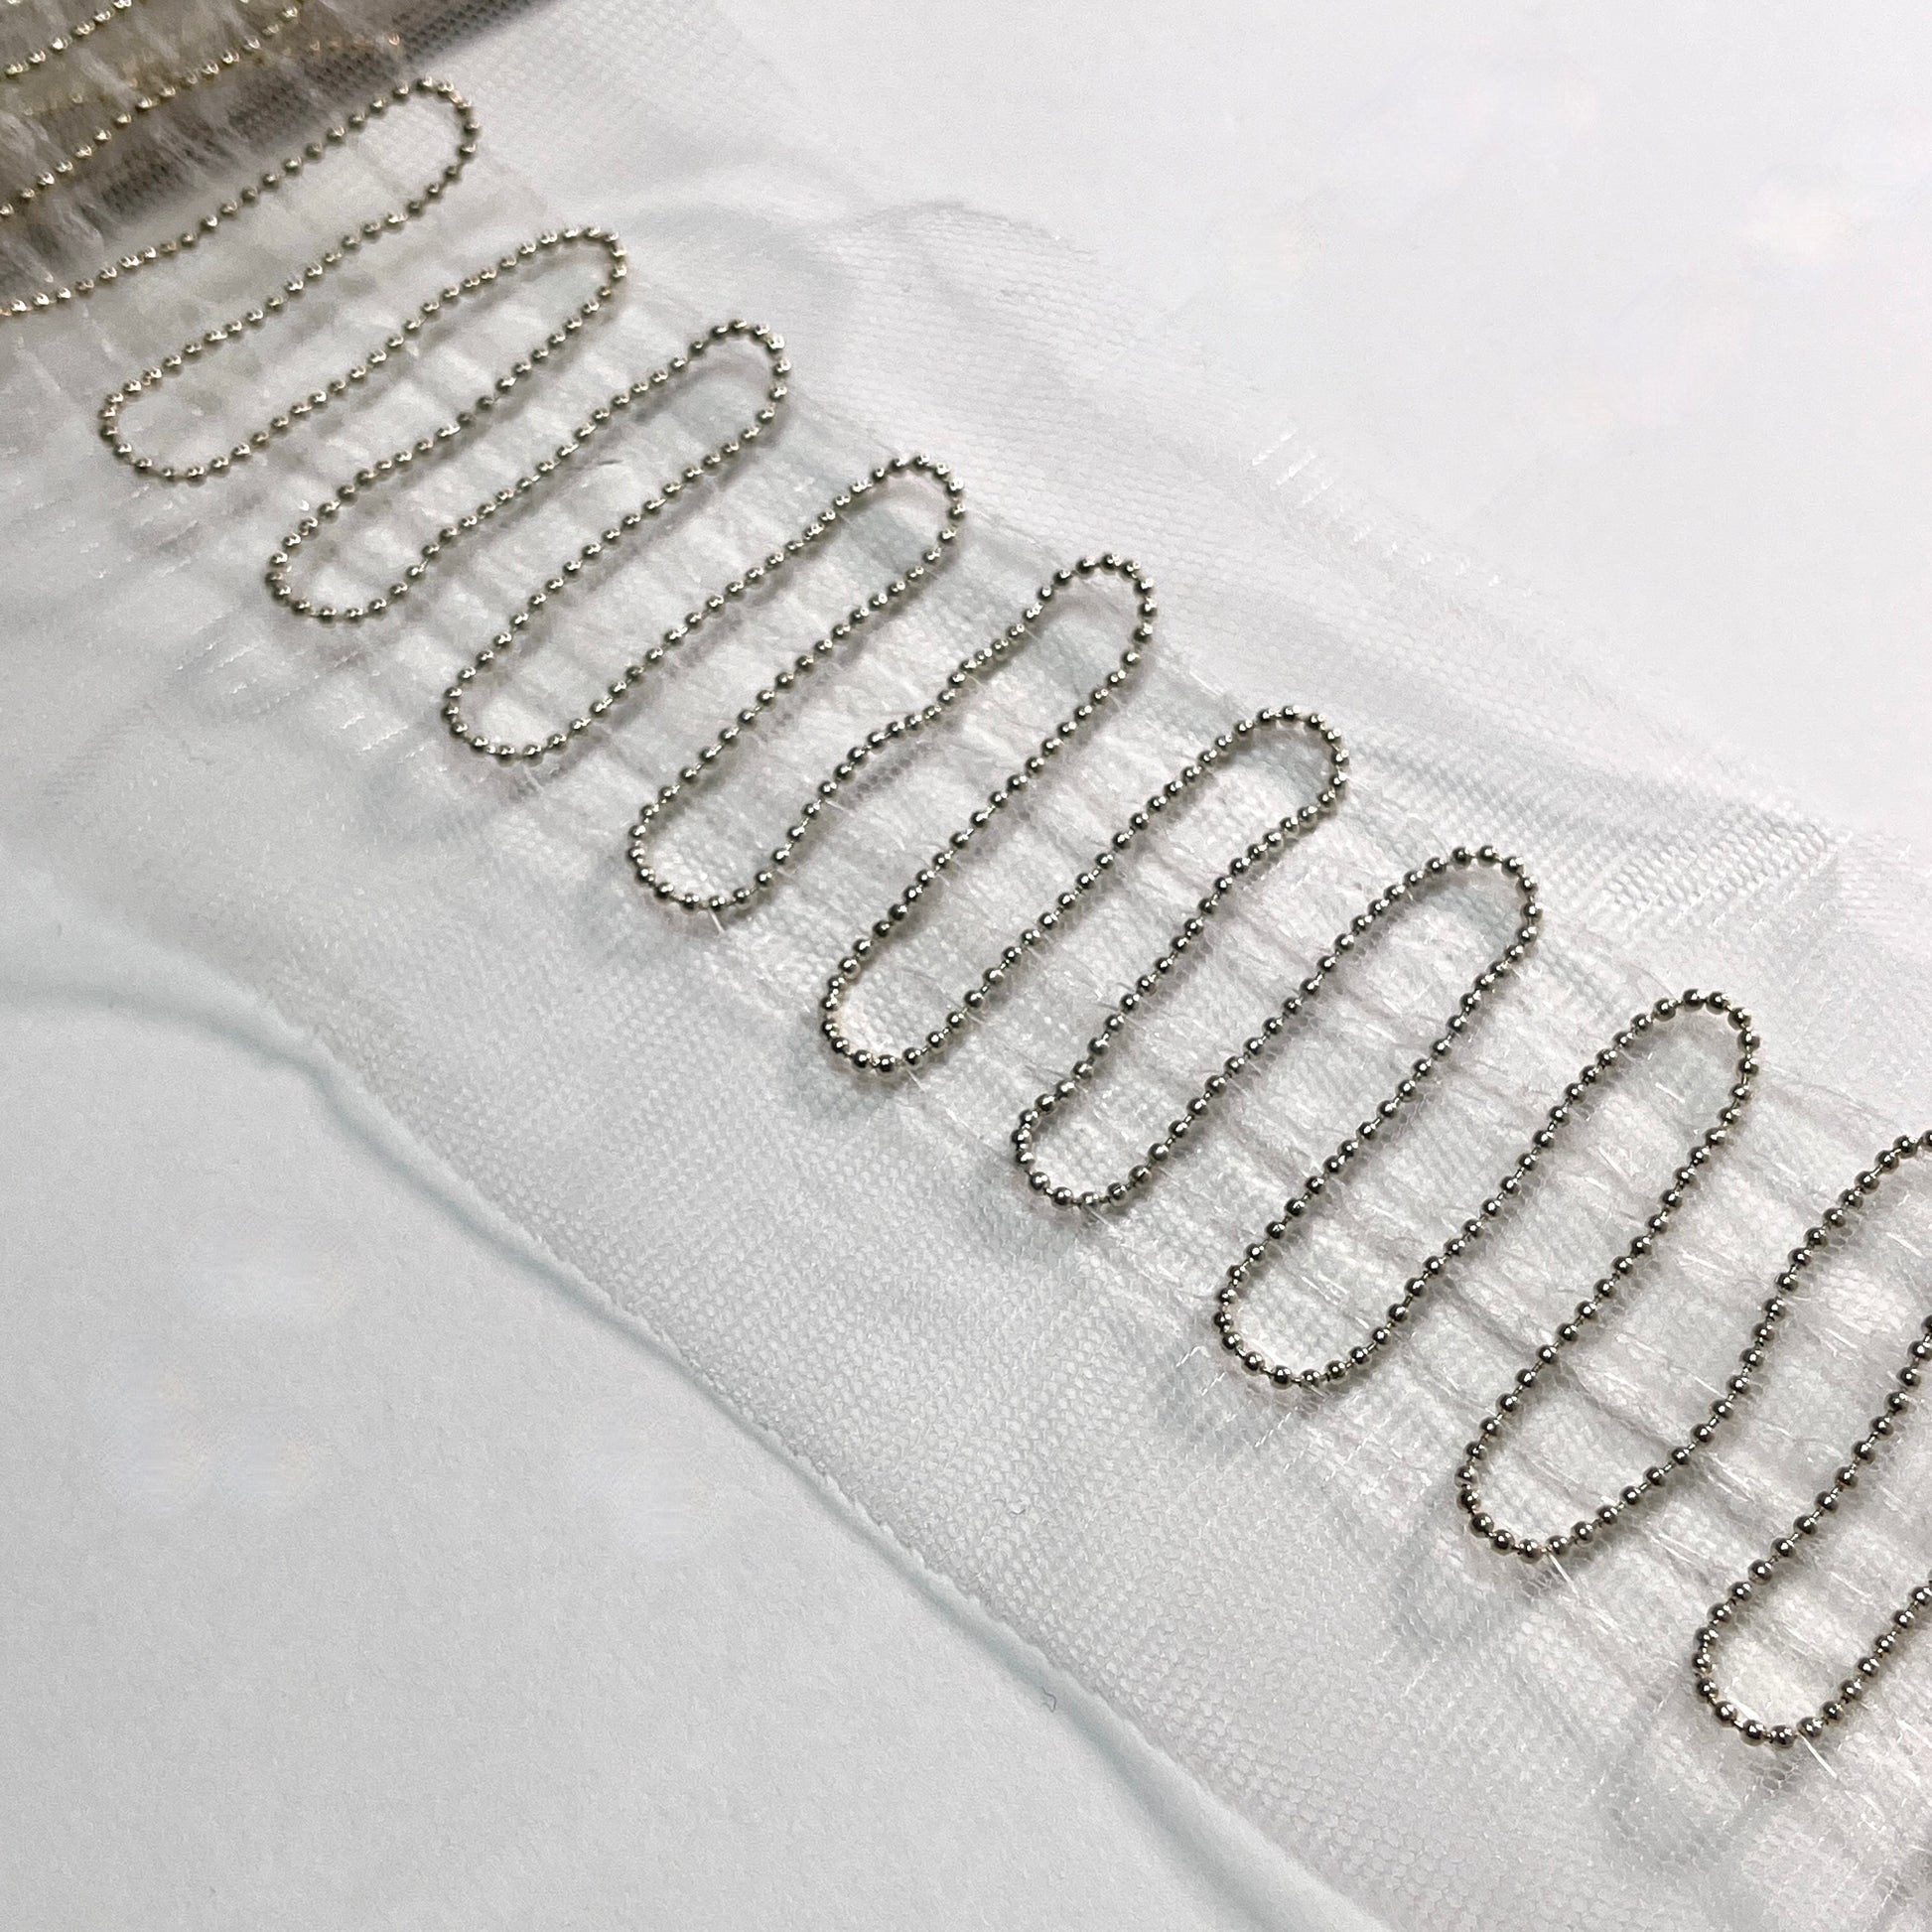 This is a super fine and unusual beaded trim, with a 1.5mm ball chain expertly stitched in a Serpentine pattern to a tulle base which would be a great base for extra beading work, should it be required. Perfect to embellish borders, waists, for bridal wear, evening wear, crafts, jewellery and headband making.